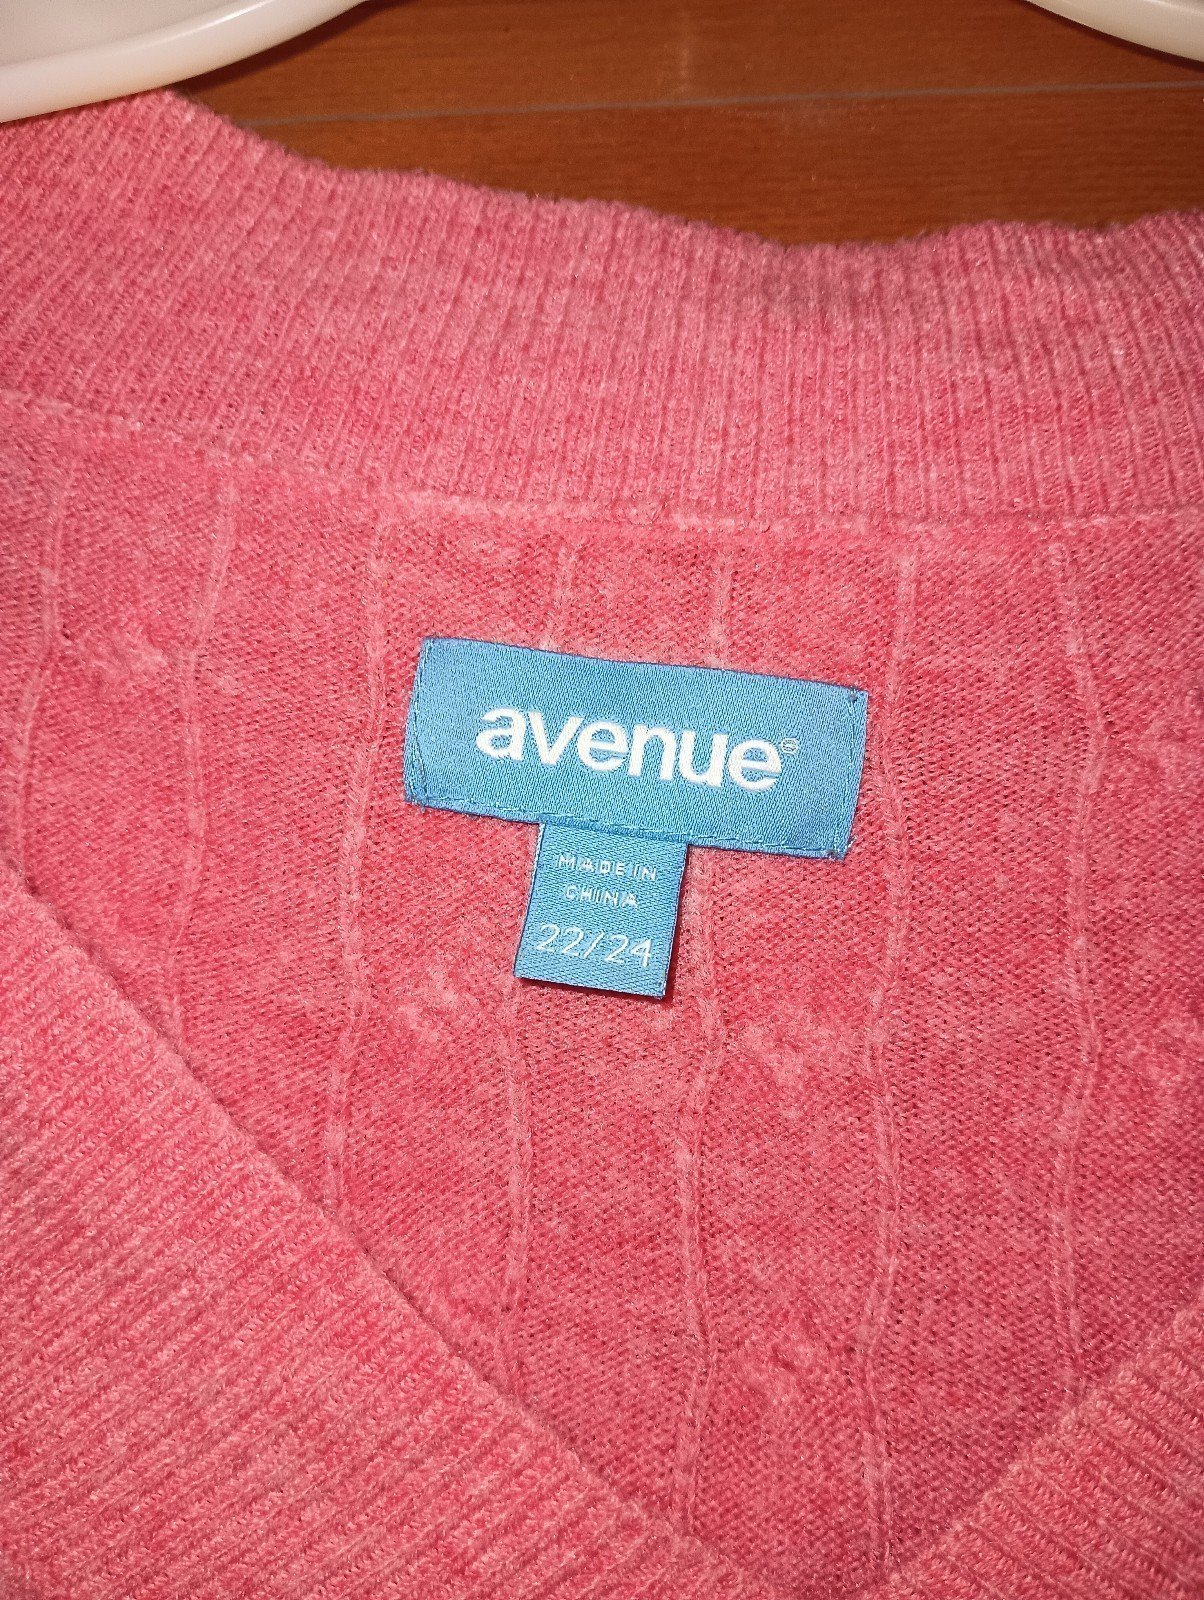 Simple Coral Sweater - Avenue - Size 3X IoiR0xoEQ Factory Price